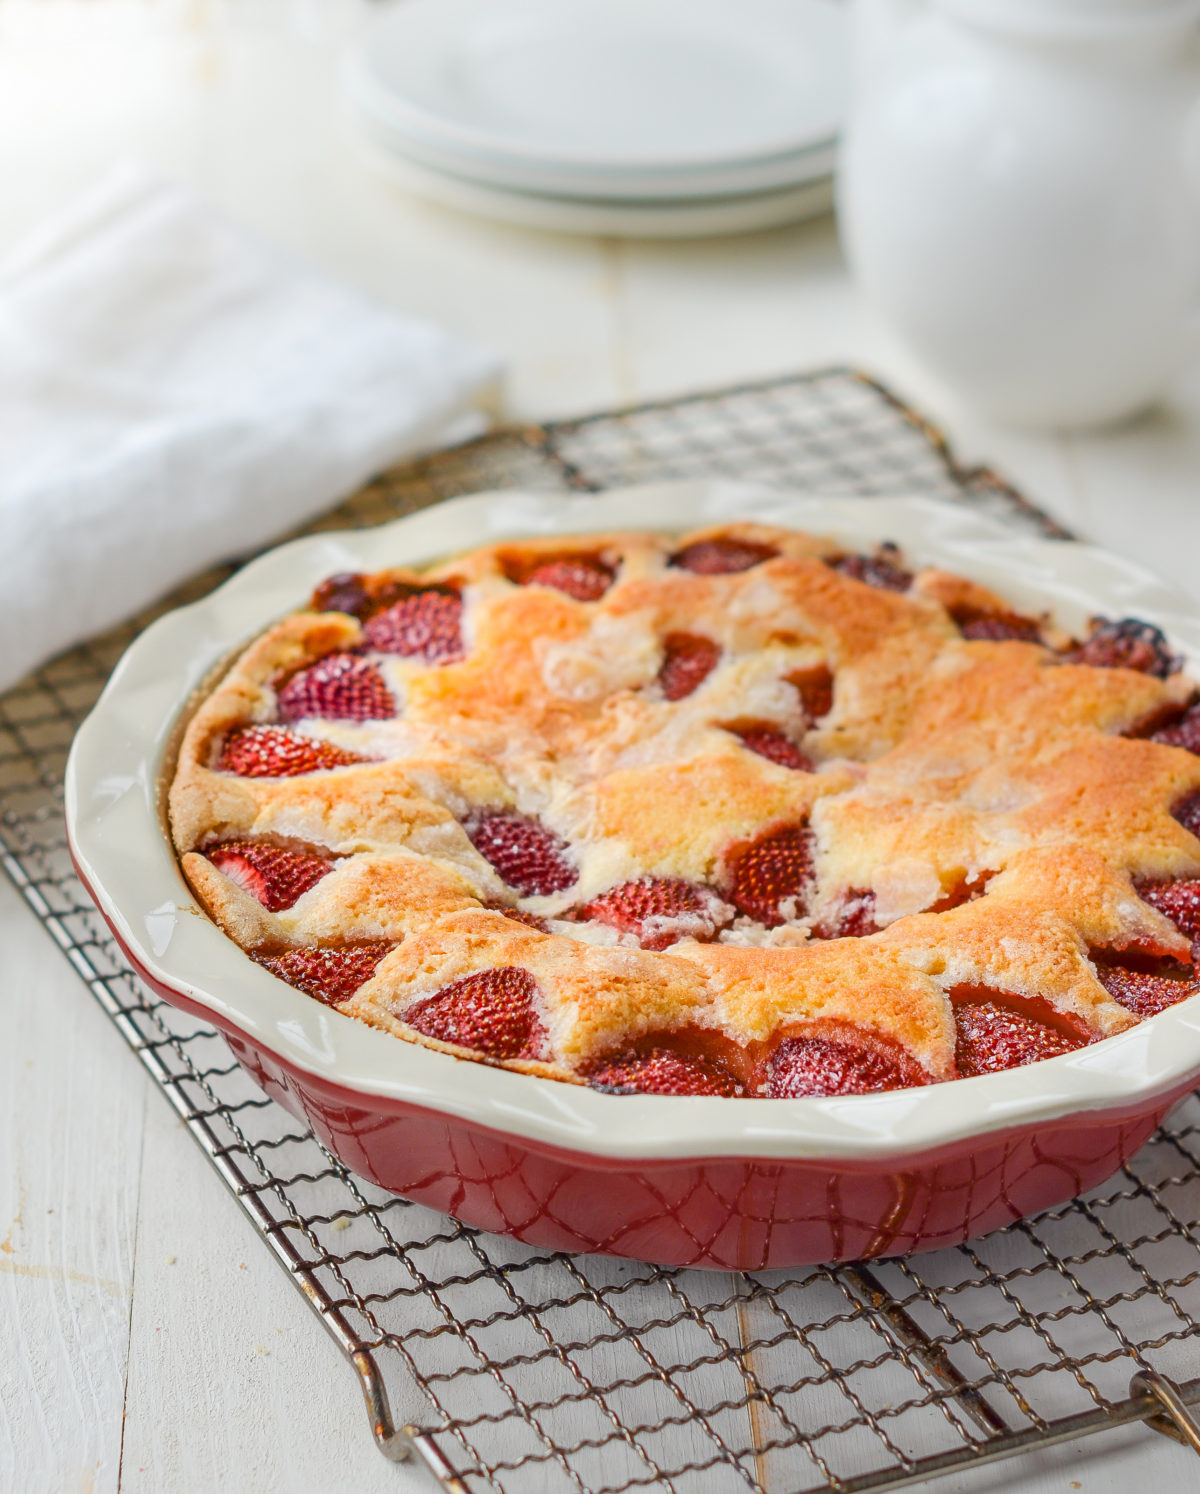 Paula Deen Strawberry Cake (Simply Delicious Recipe) - Insanely Good